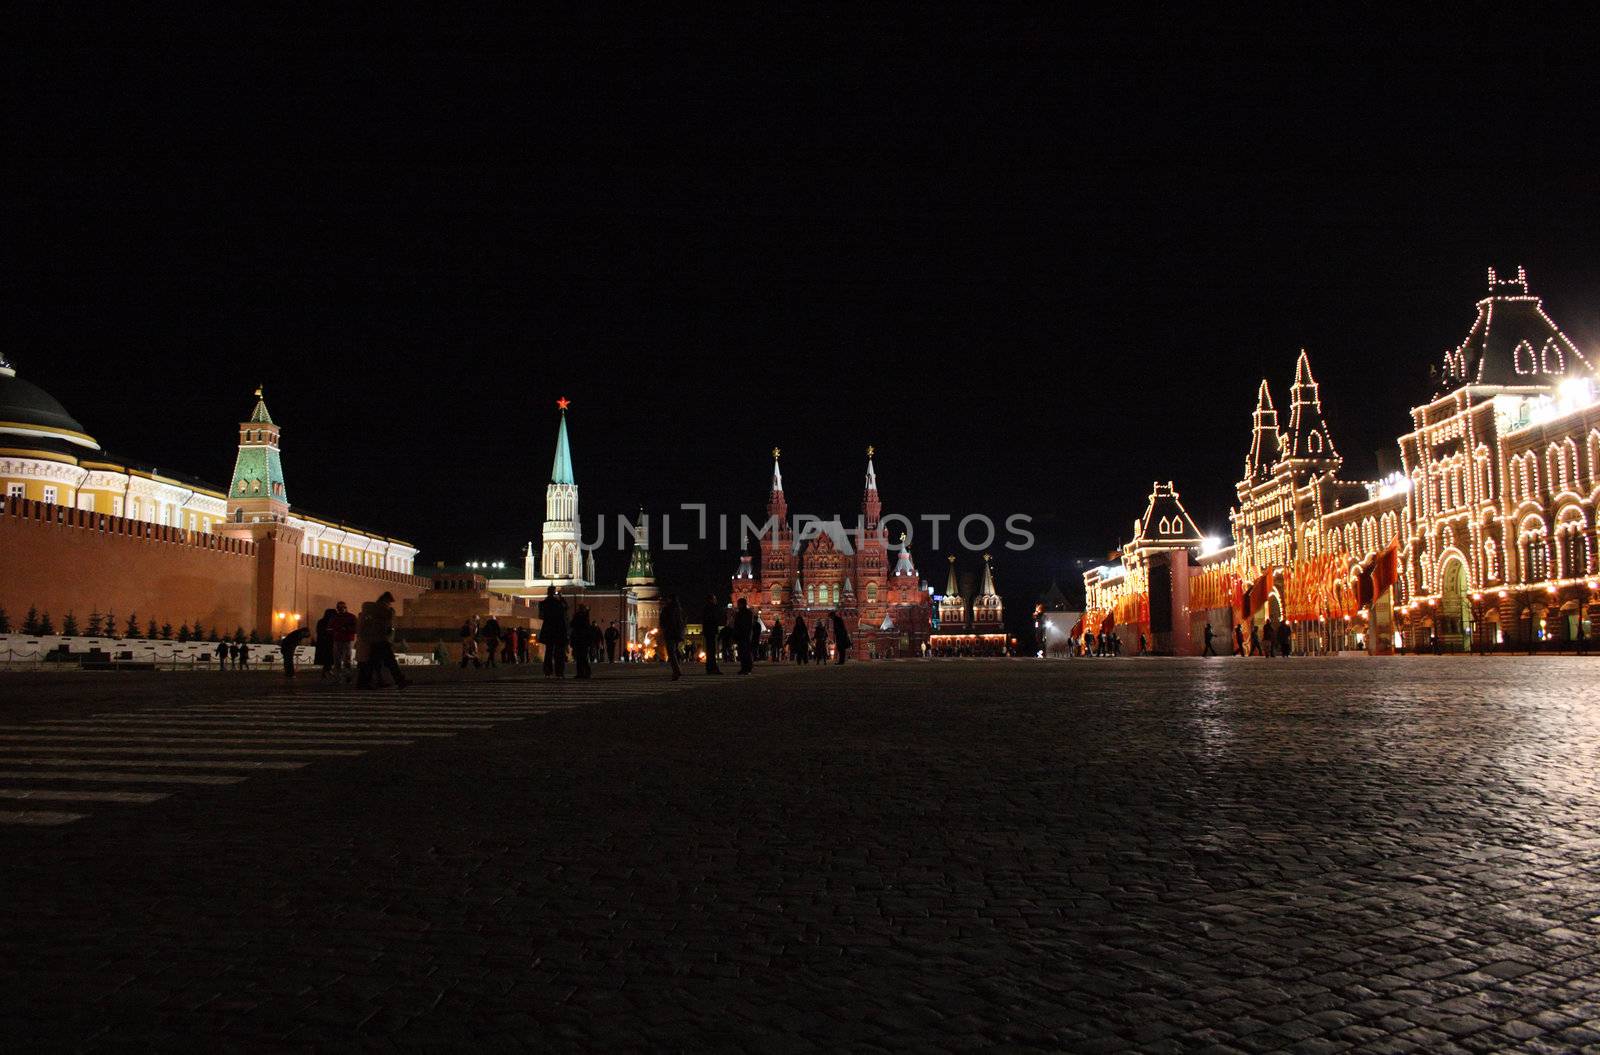 Russia. Red square, kremlin, Moscow, night